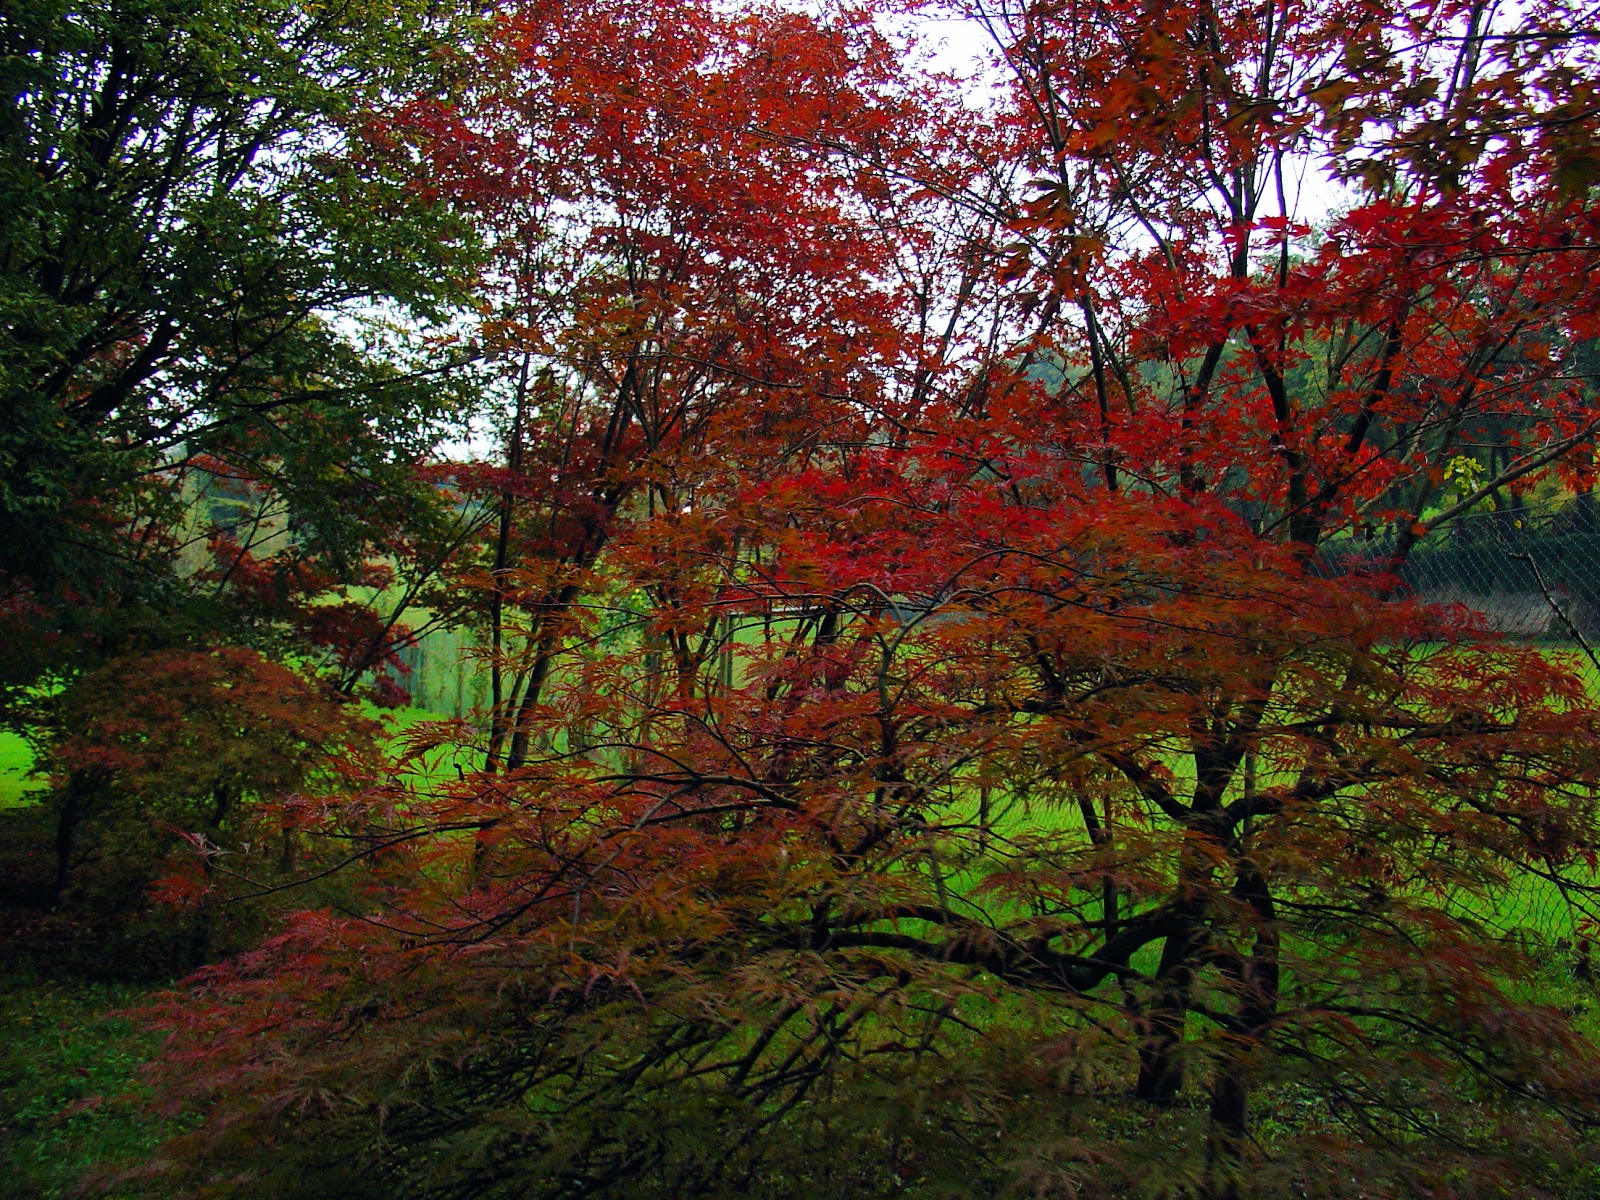 Japanese Maples ablaze with fiery hues of autumn.